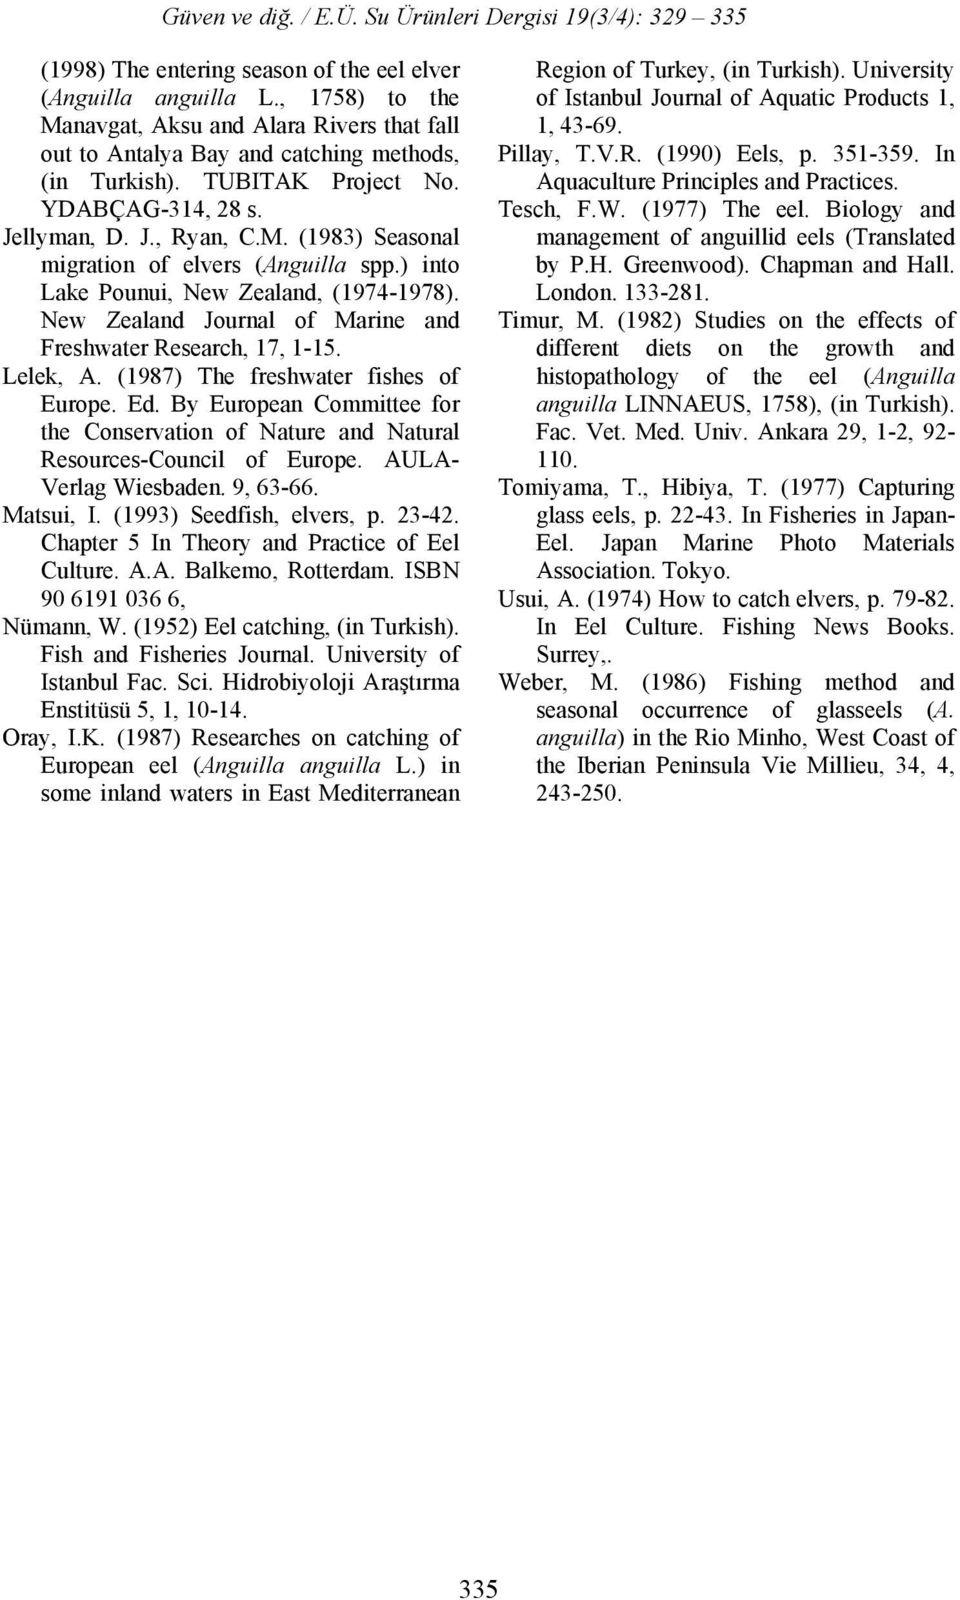 New Zealand Journal of Marine and Freshwater Research, 17, 1-15. Lelek, A. (1987) The freshwater fishes of Europe. Ed.